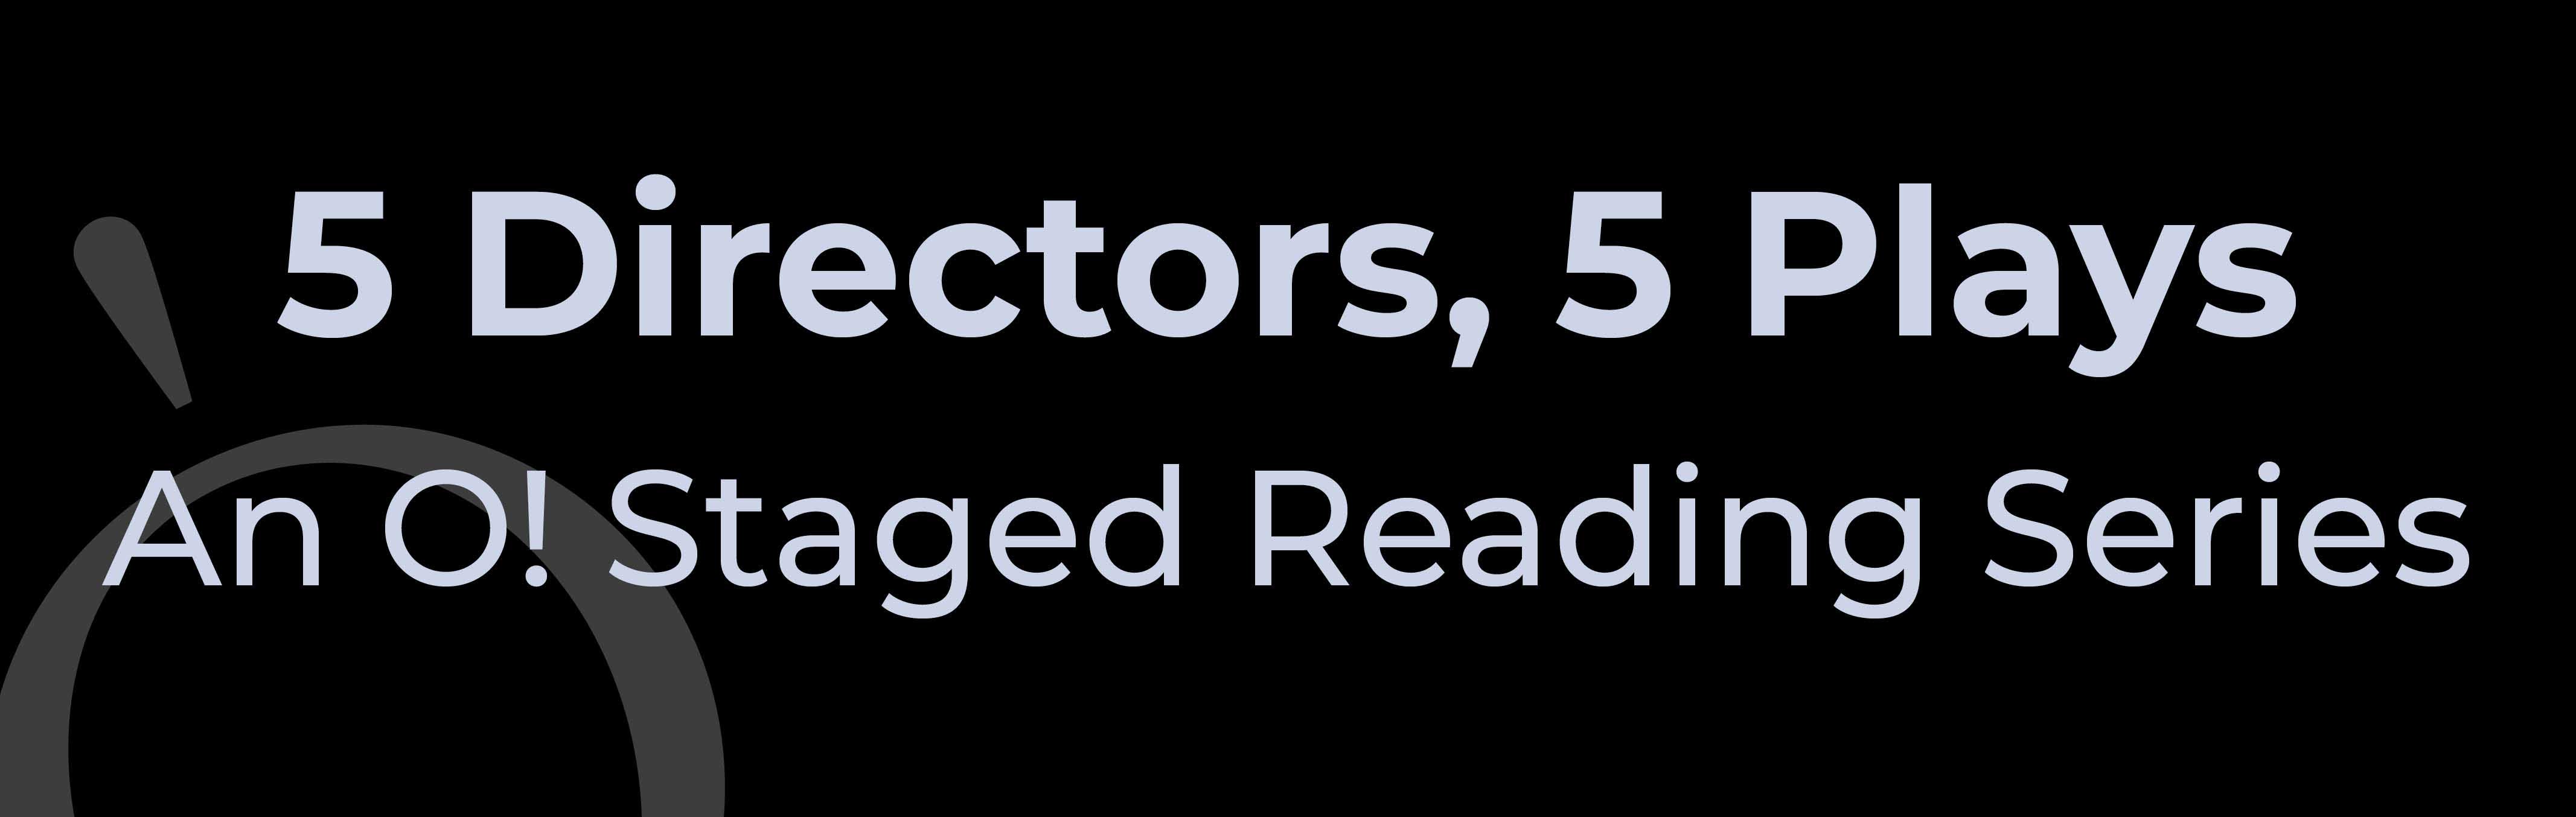 5 Directors, 5 Plays - An O! Staged Series